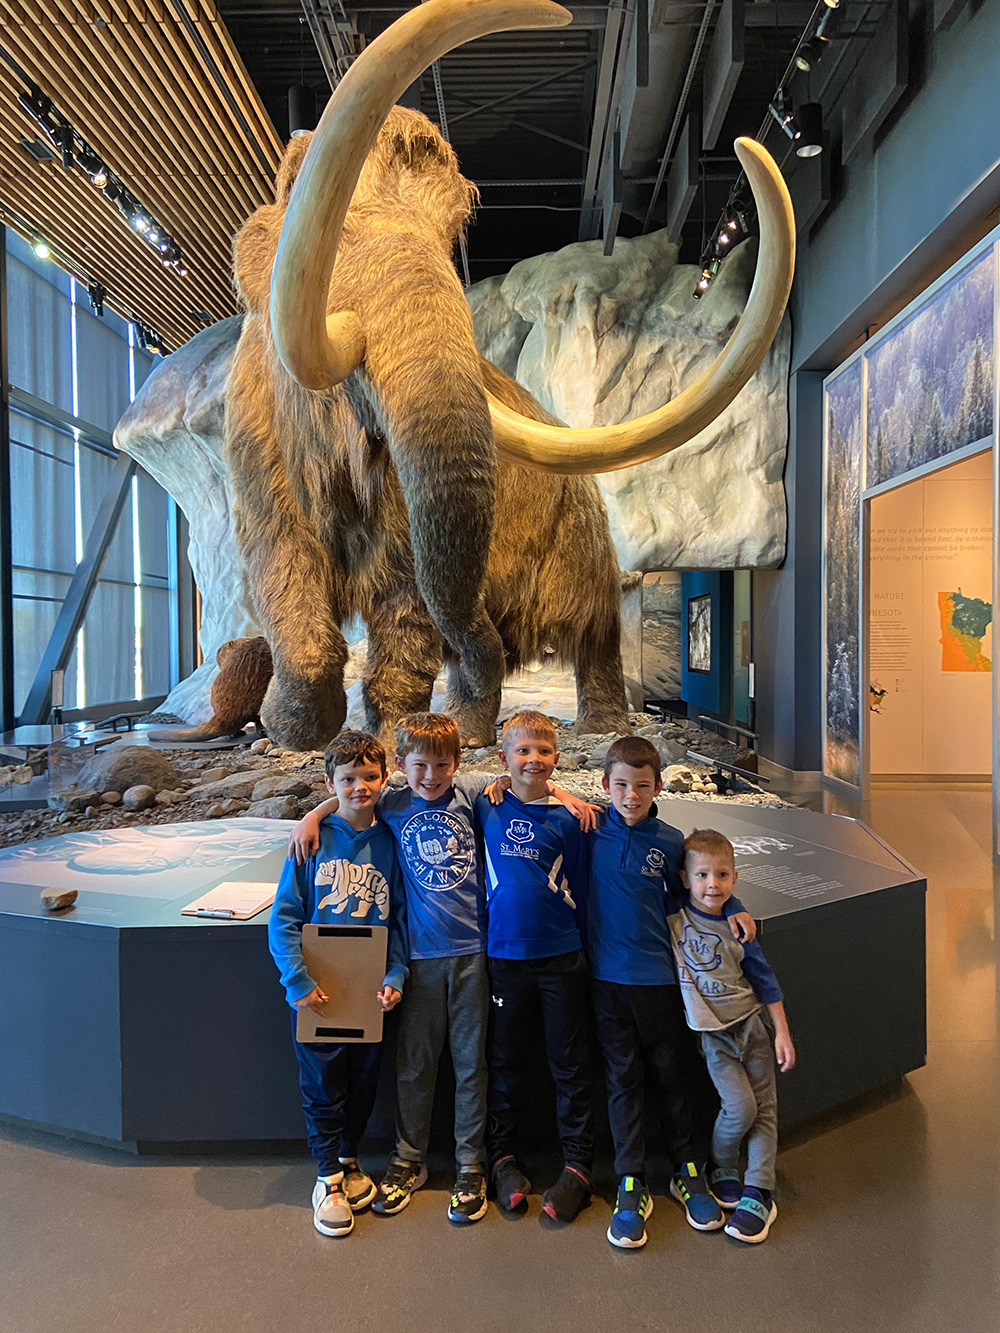 Five boys stand in front of a mammoth exhibit at a museum. They are smiling and posing for the photo, wearing casual clothes and shades of blue. The background features a large mammoth model and information displays with a rocky and snowy setting.